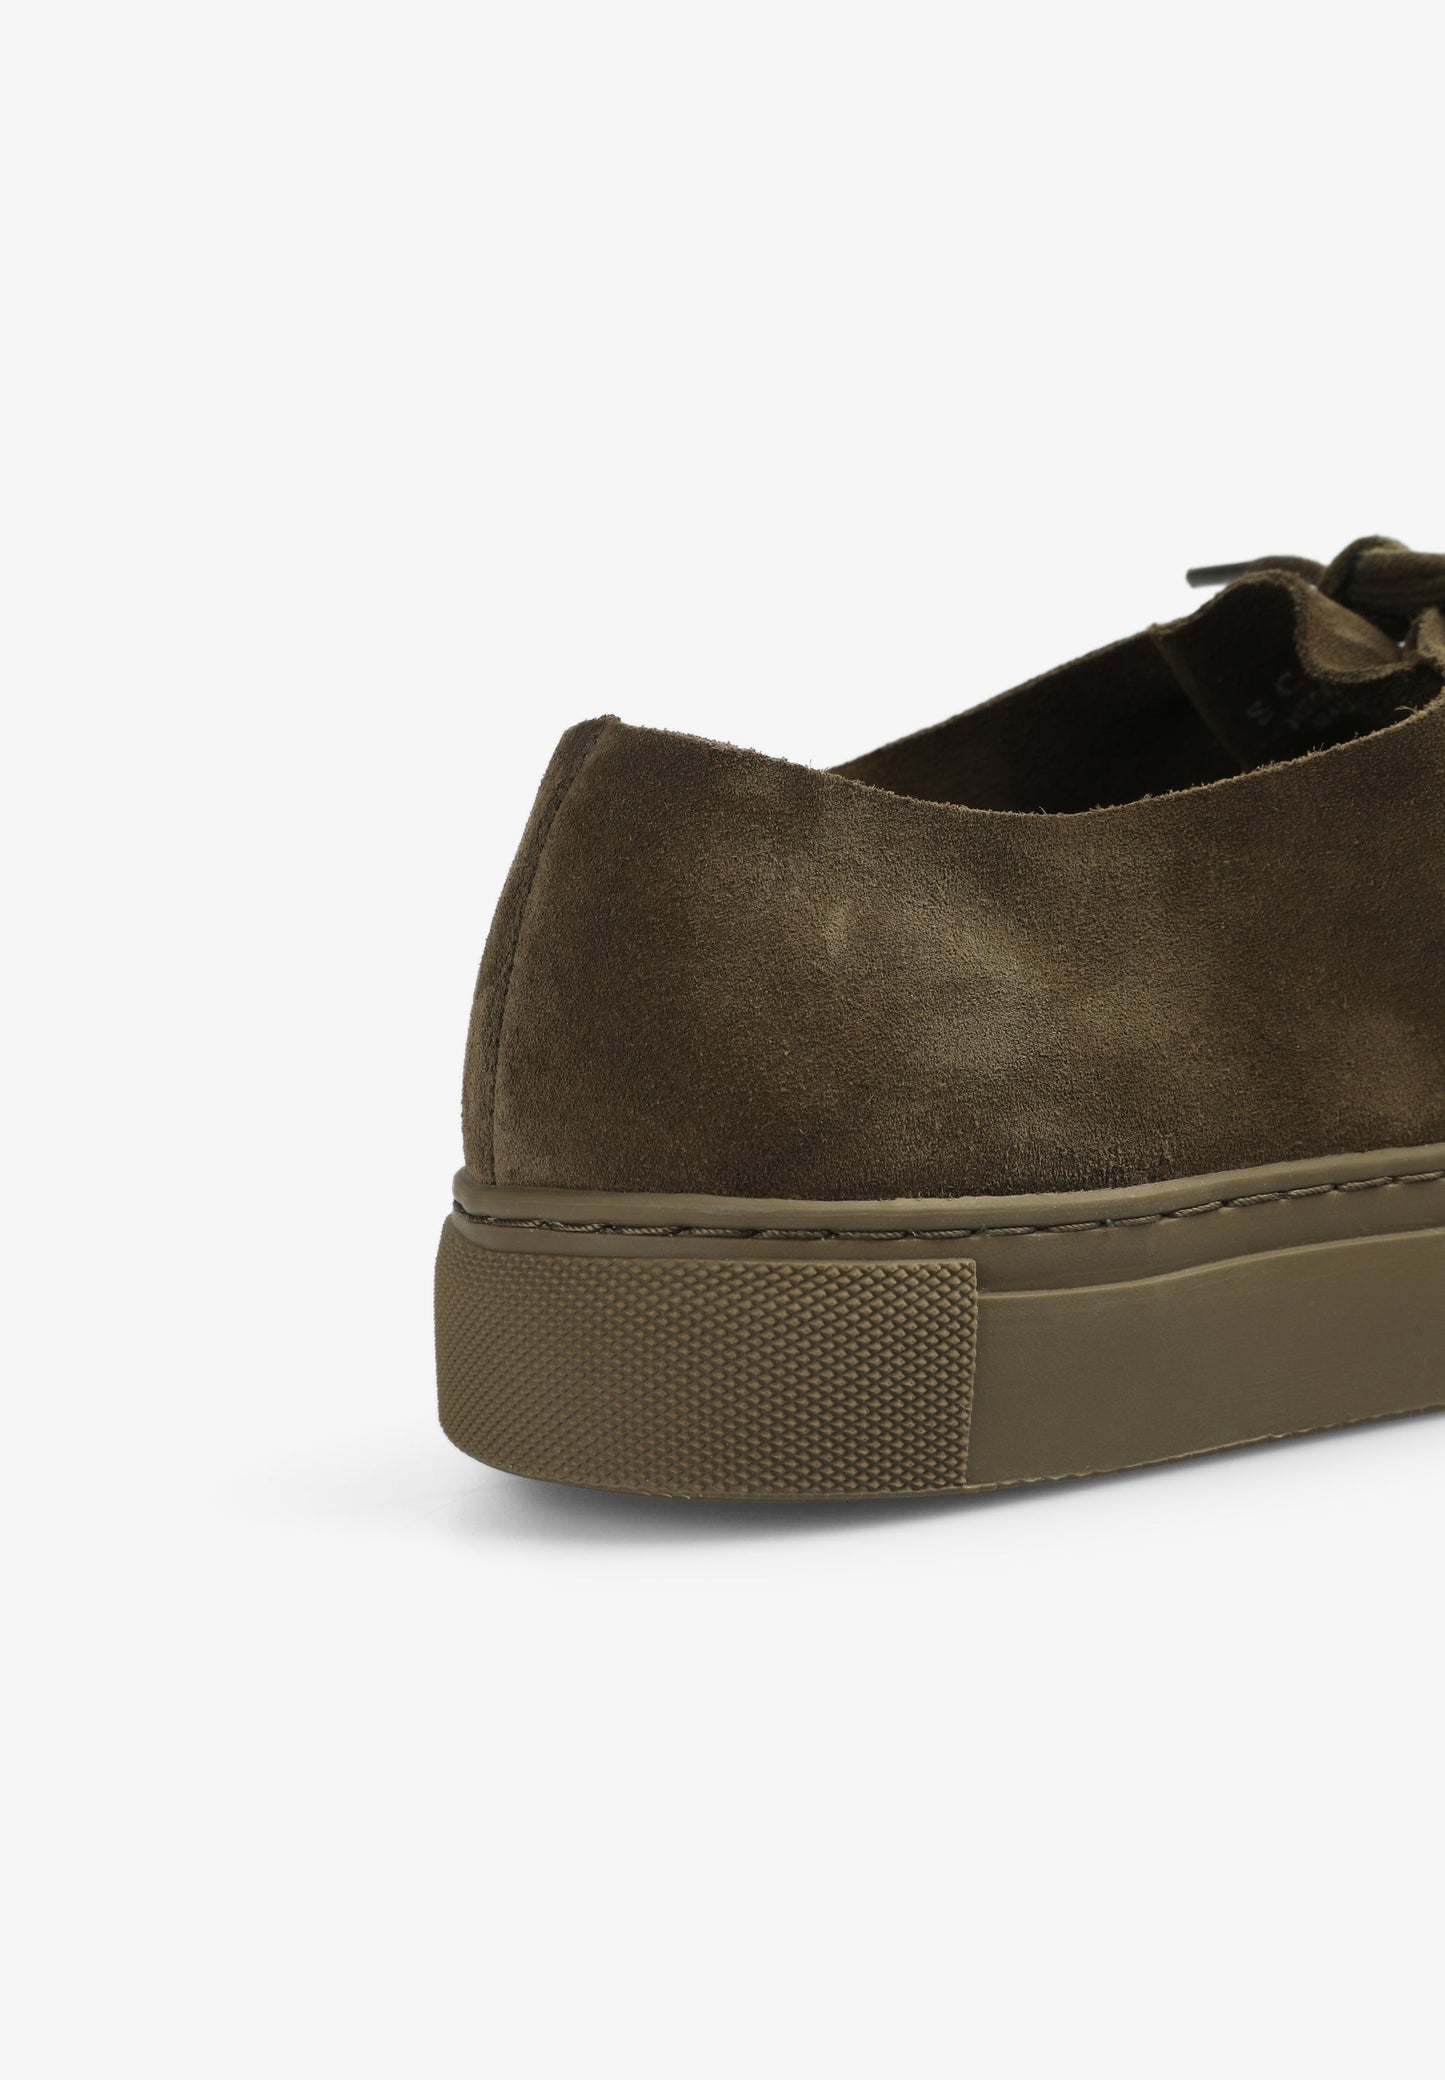 LOW SUEDE SHOES